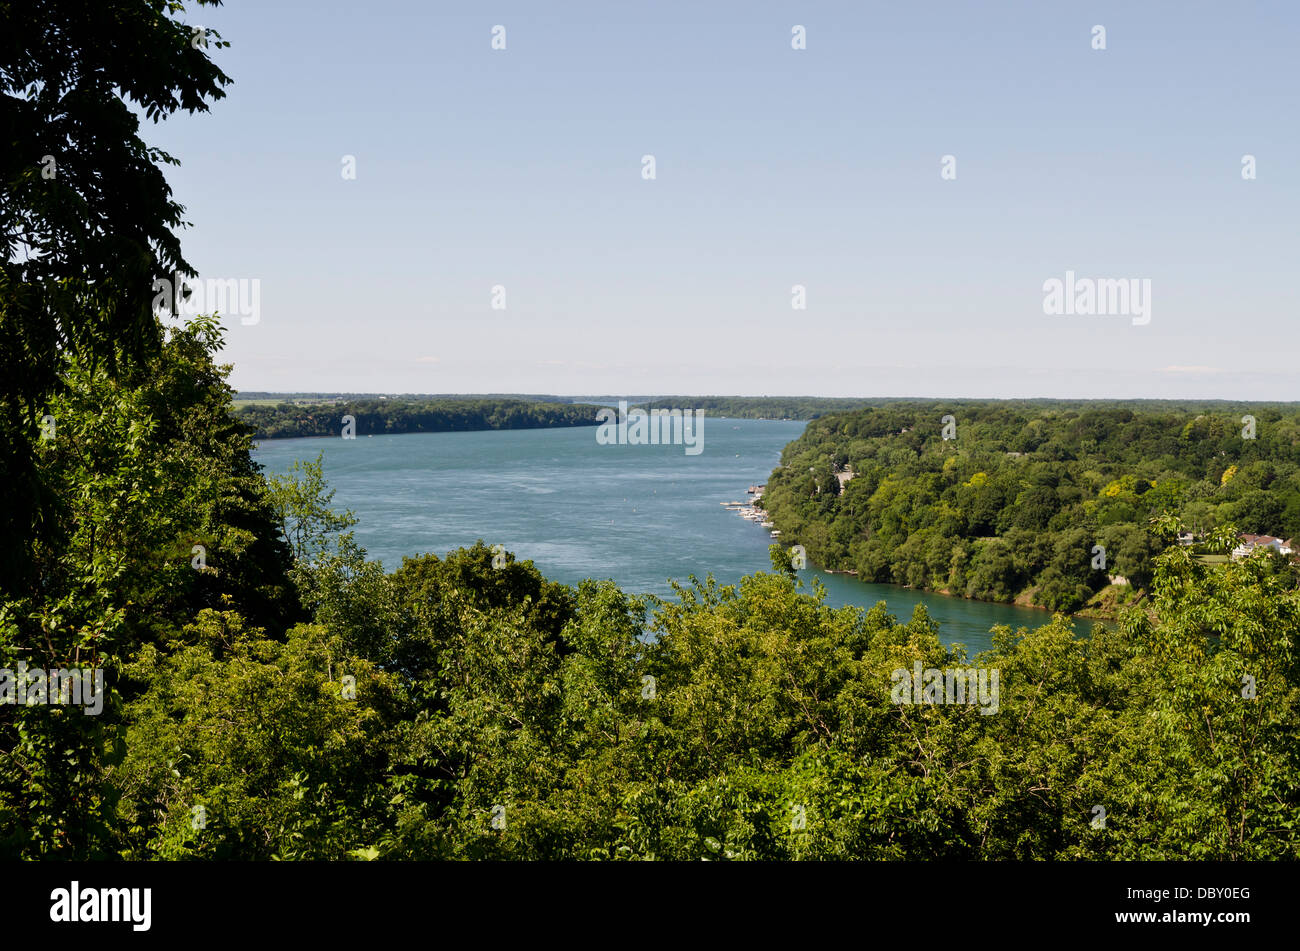 View of the Niagara river from Queenston, Ontario, Canada.   Looking over towards New York state. Lush forests and greenery. Stock Photo